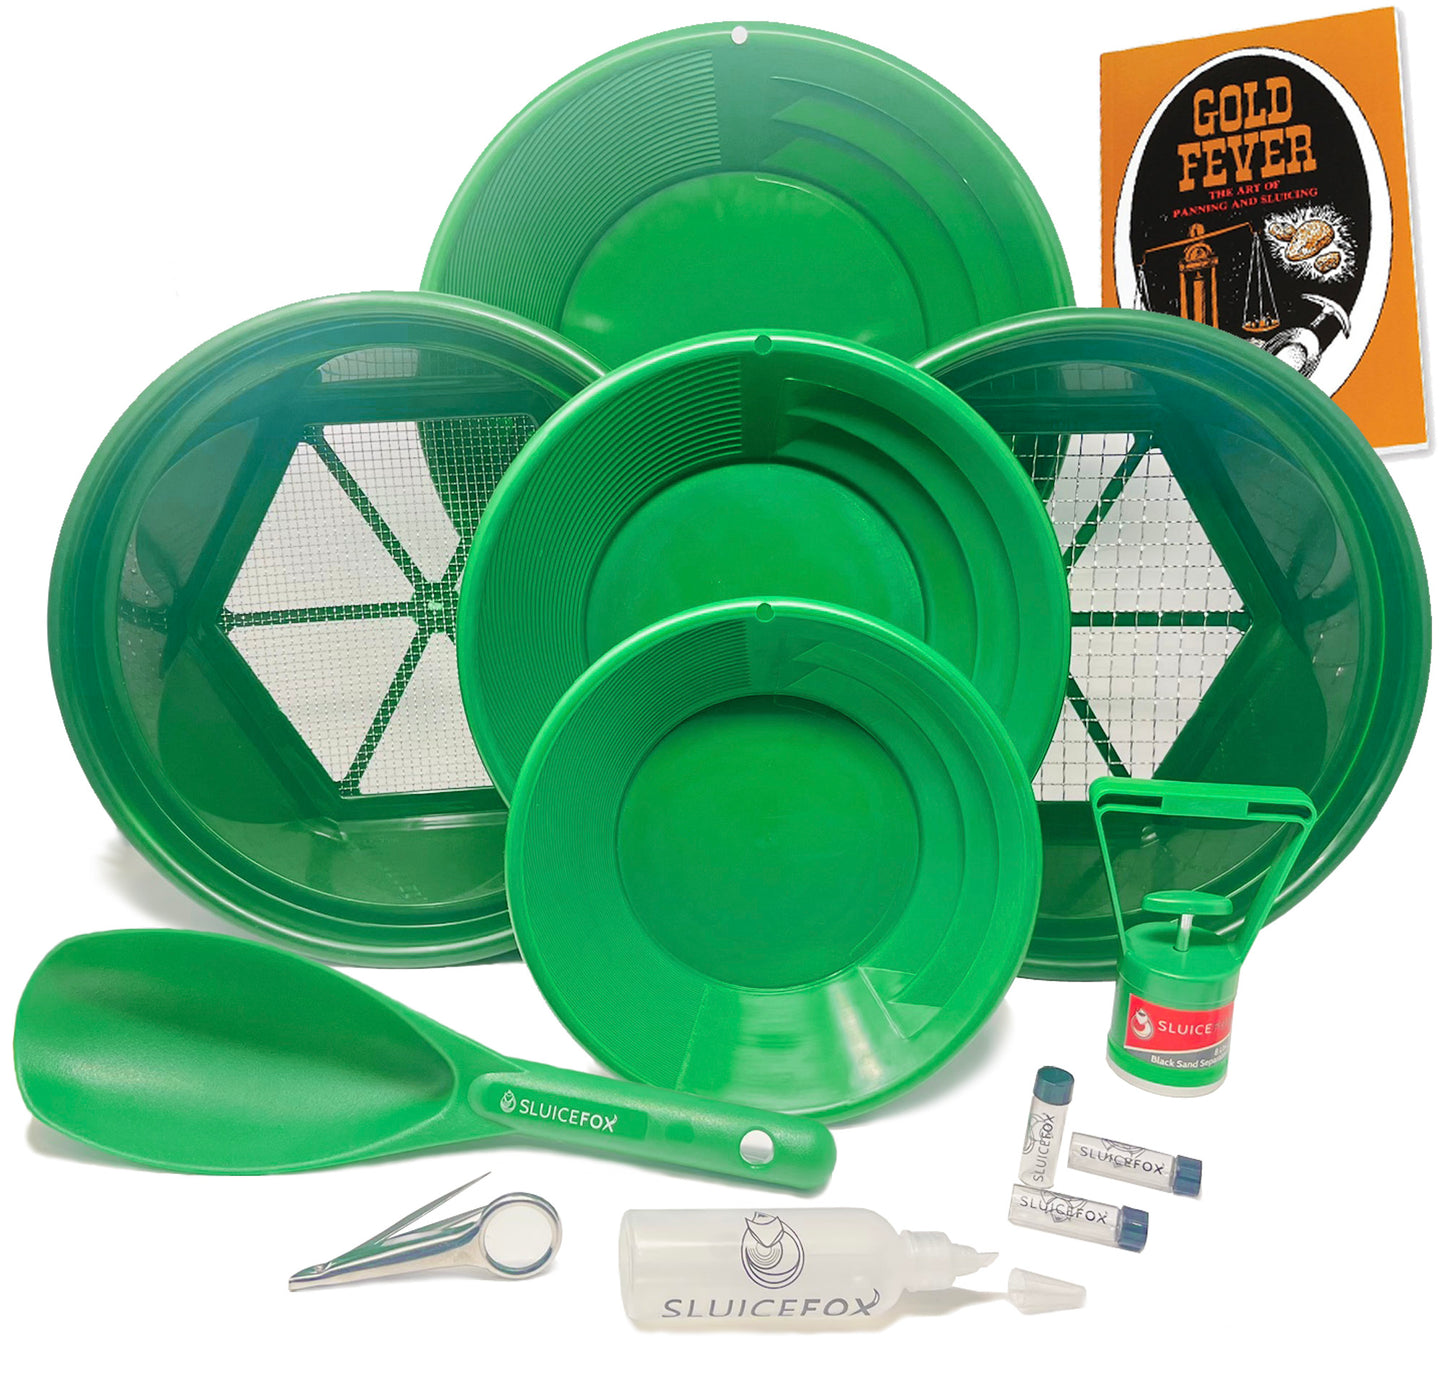 Gold panning kit for gold prospecting; 11 pc set + Bonus includes 3 gold pans; 2 gold classifiers; paydirt scoop small plastic gold shovel; snuffer bottle; black sand gold magnet and Gold Fever book!